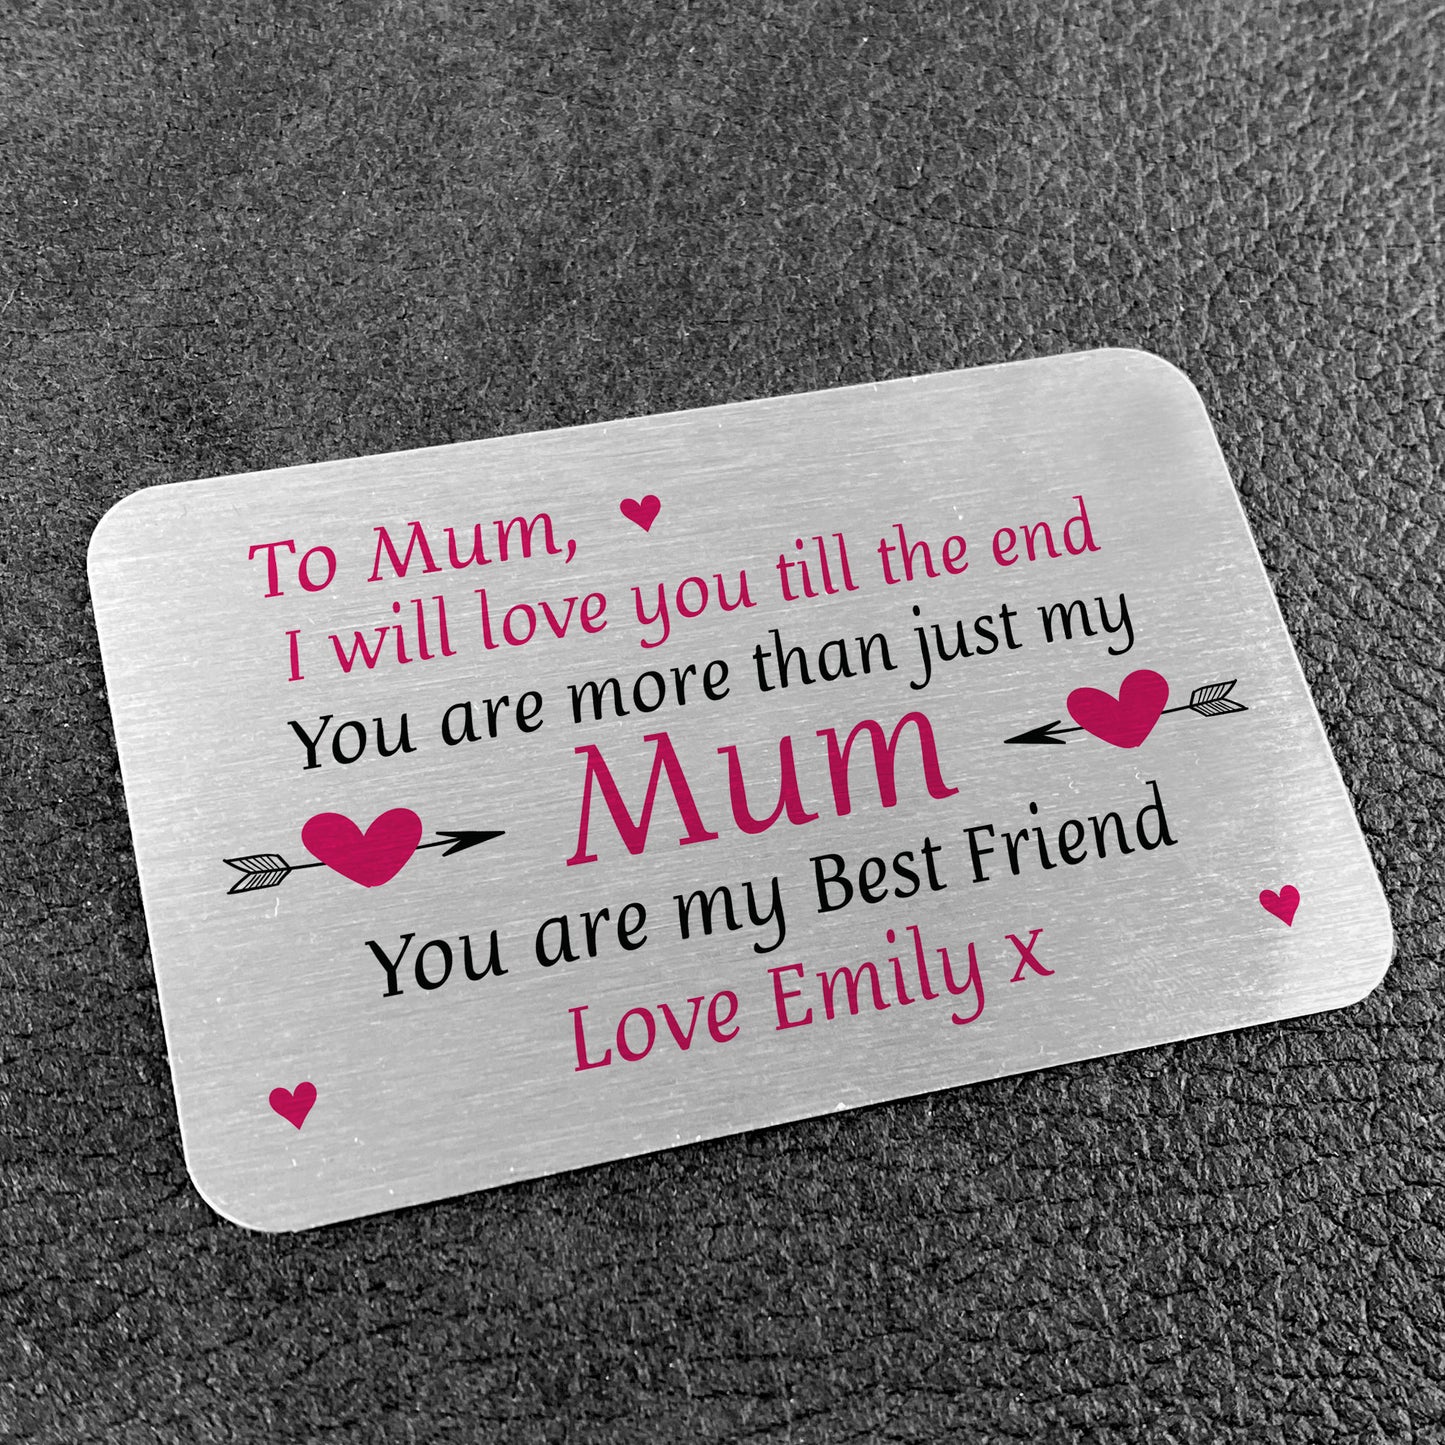 Mum Gift For Mothers Day Birthday Best Friend Personalised